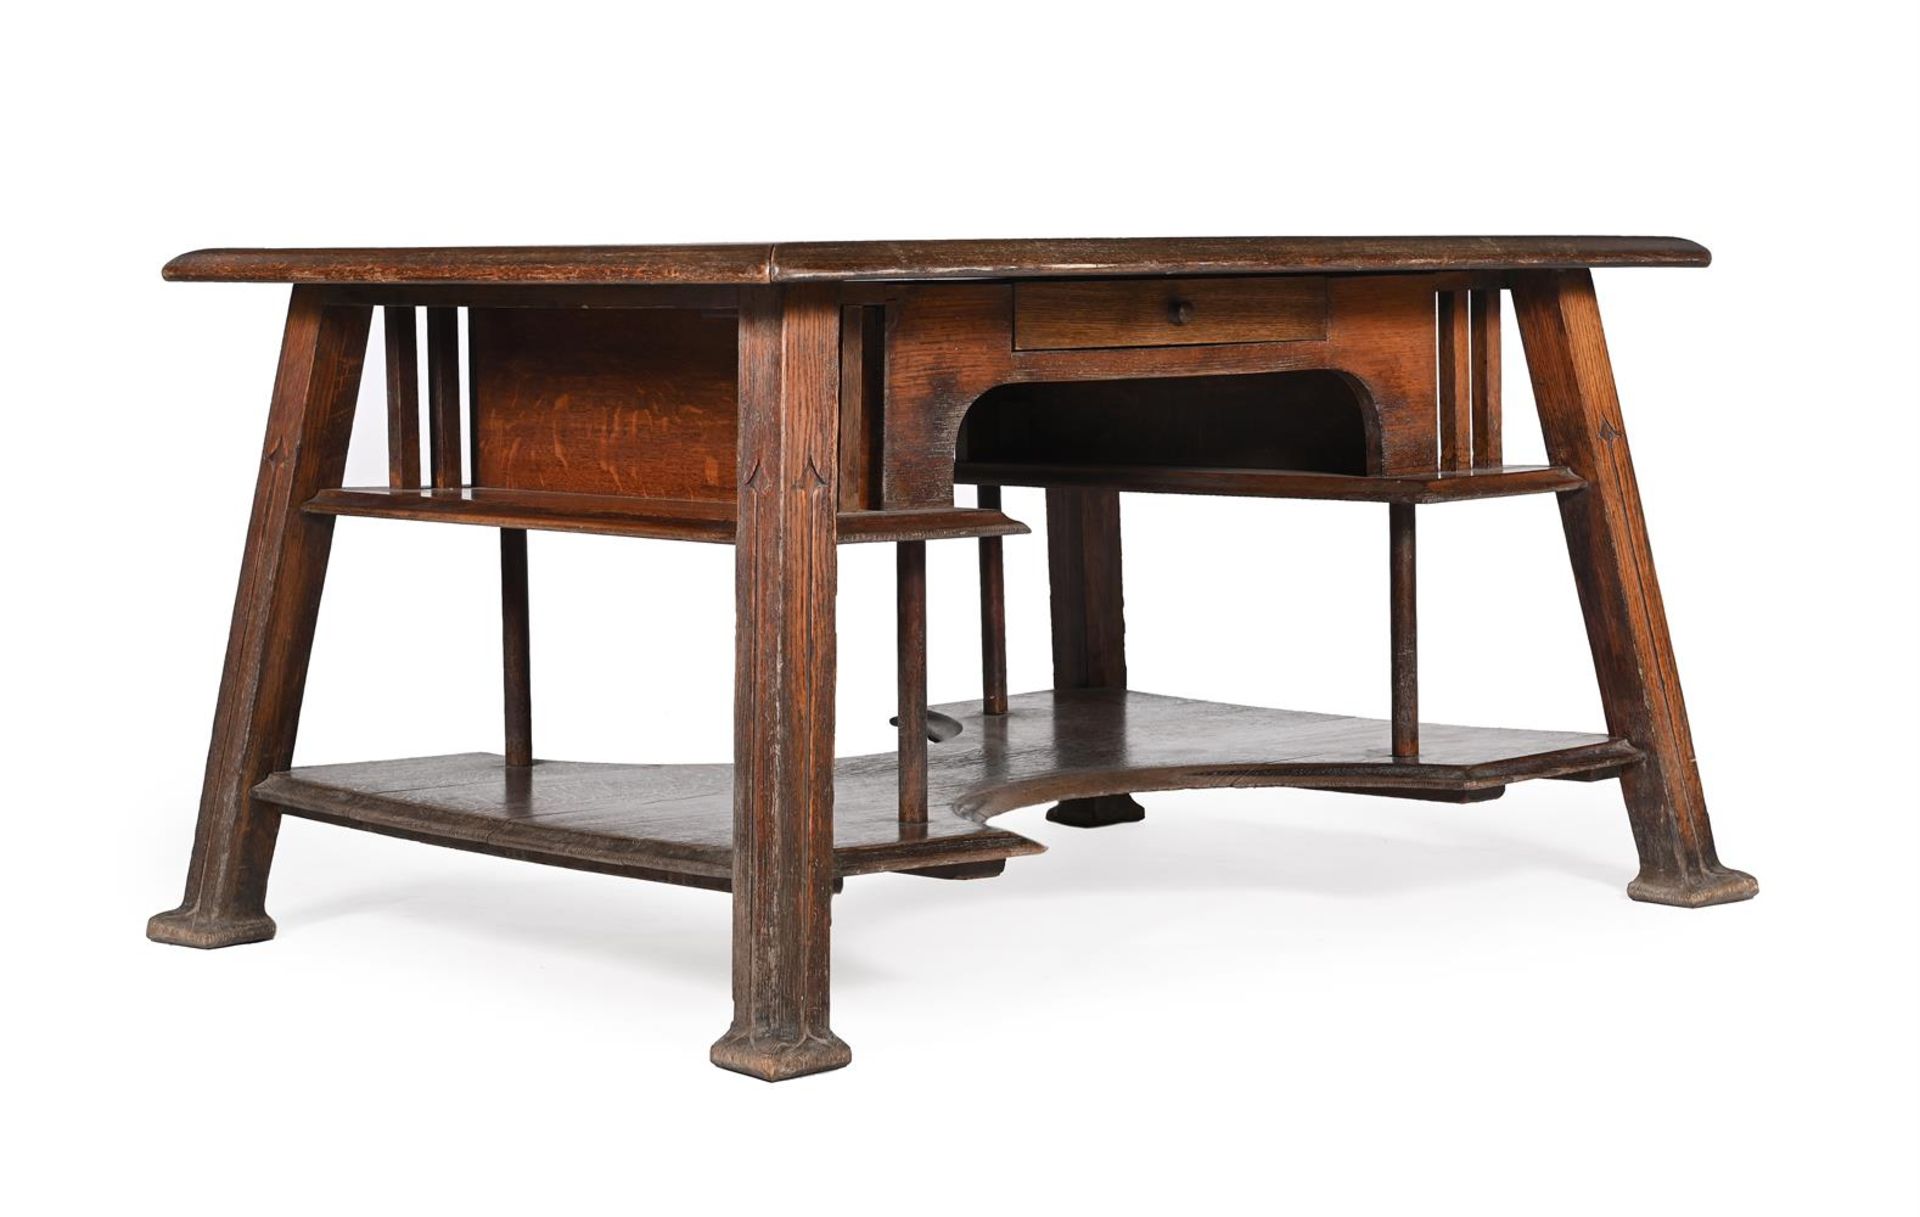 AN ARTS AND CRAFTS OAK WRITING TABLE CIRCA 1900 - Image 2 of 3